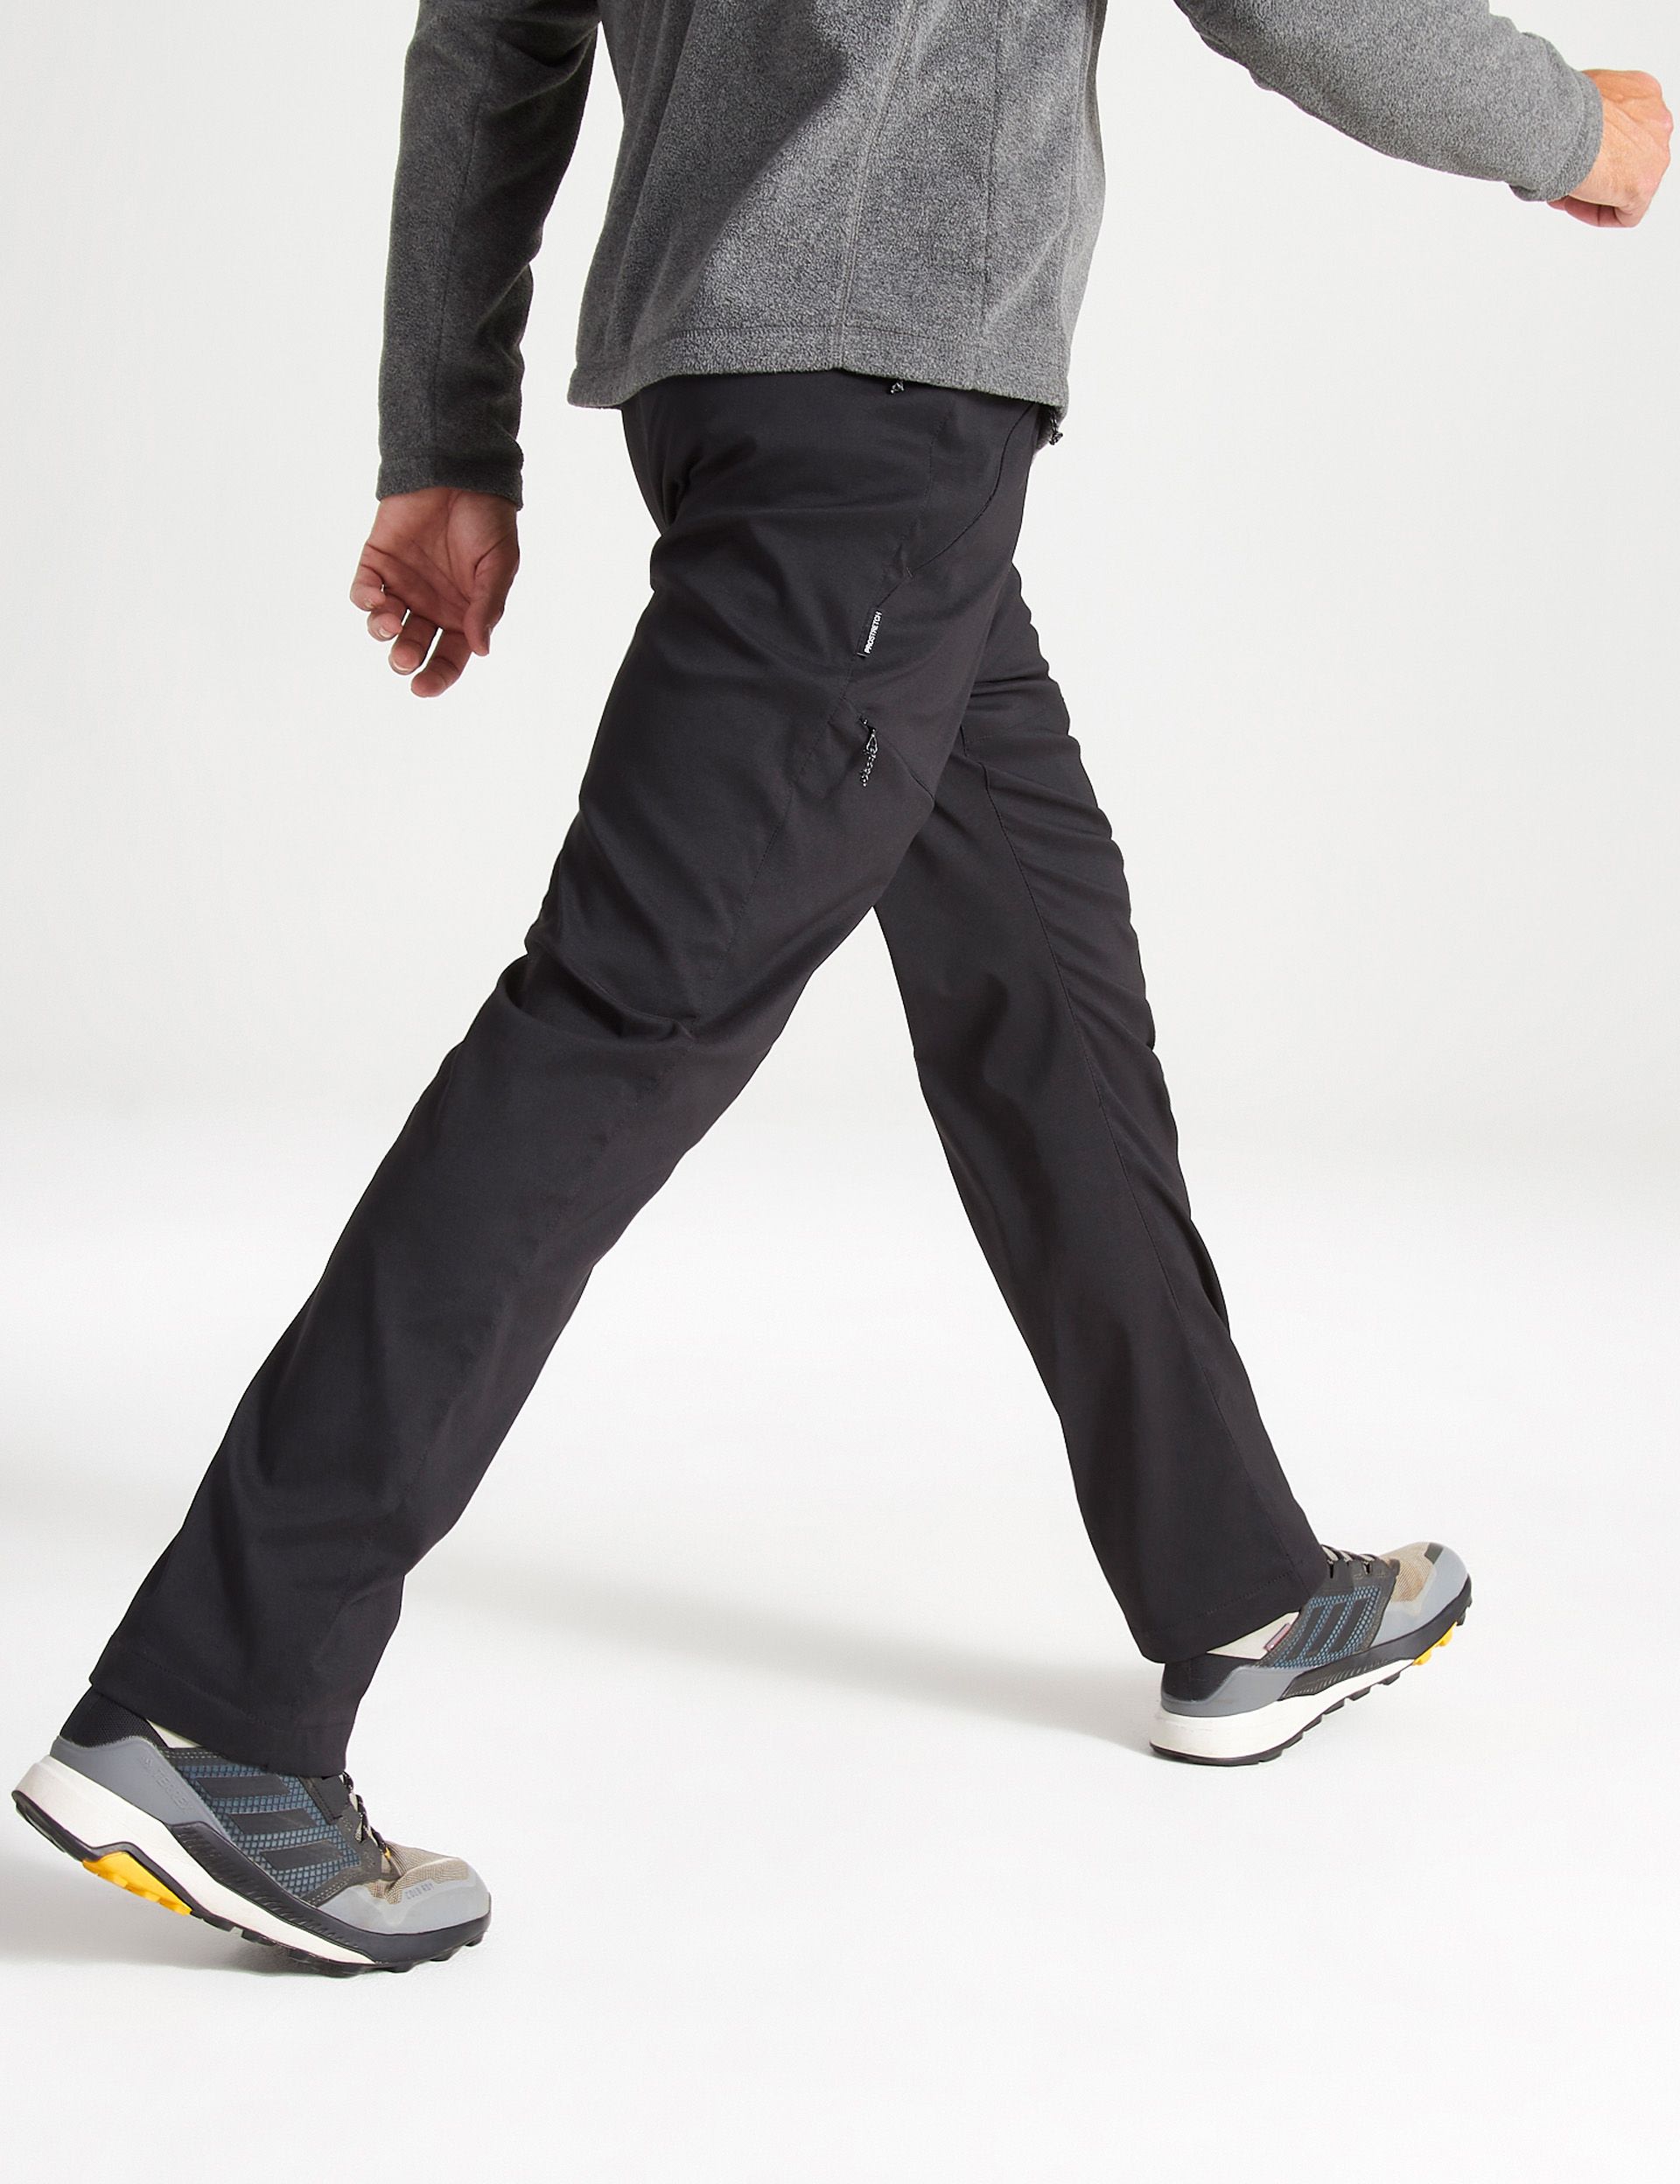 Kiwi Tailored Fit Trekking Trousers 5 of 7